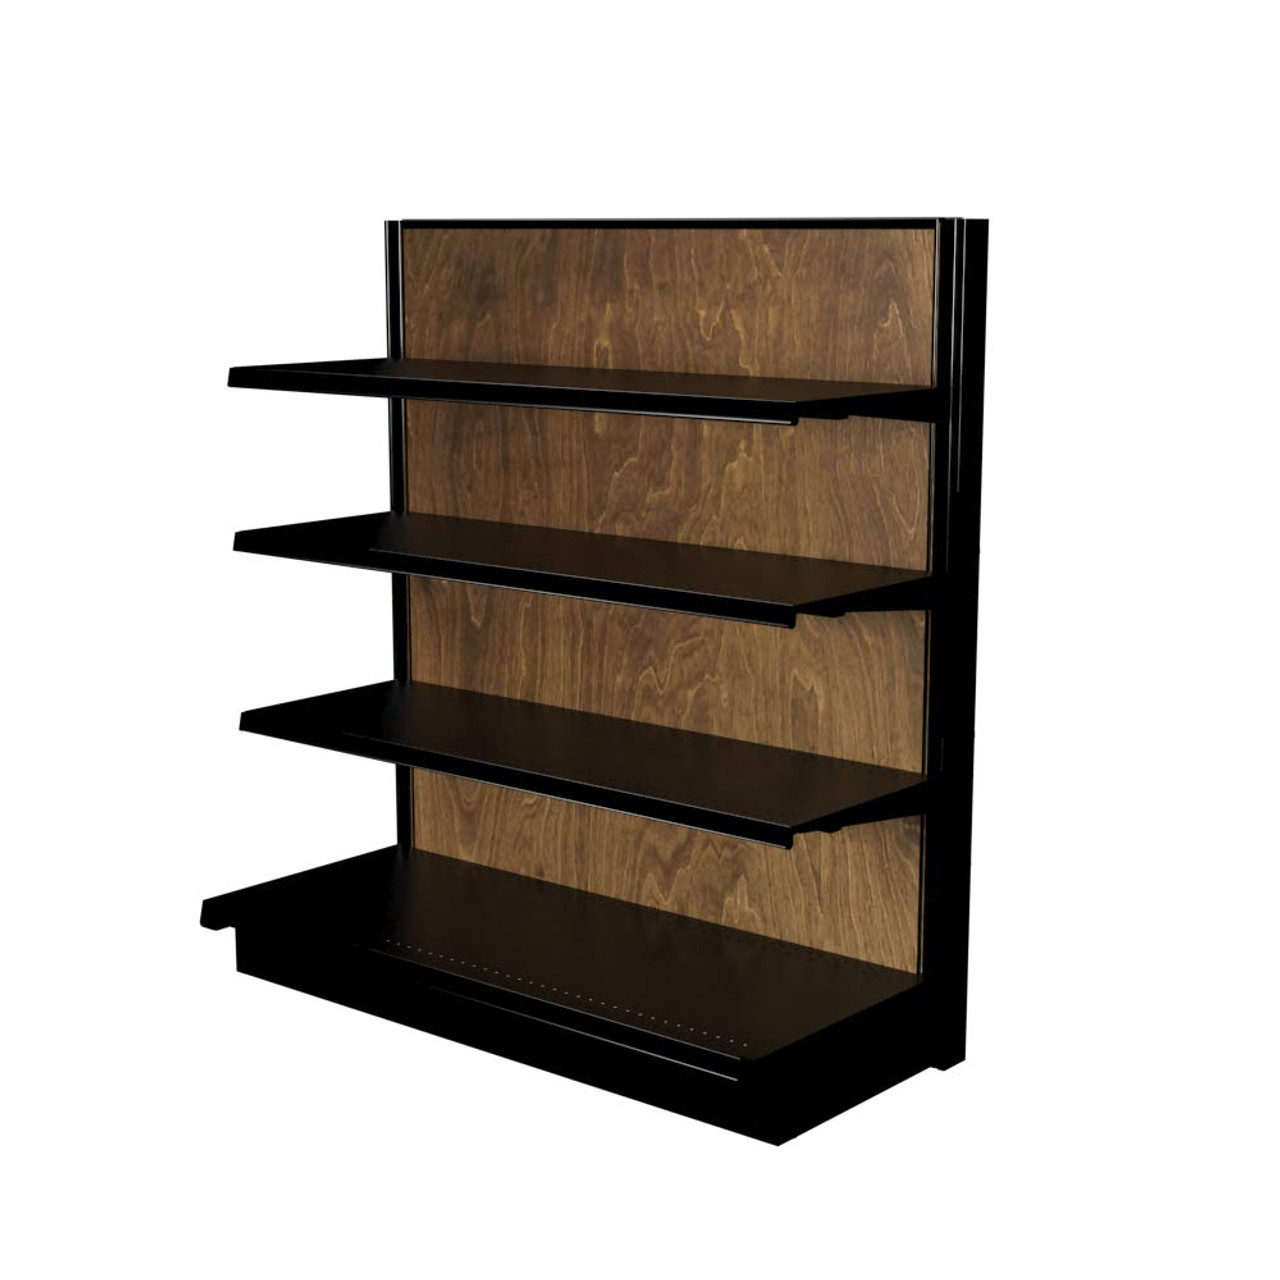 Wooden Baked Goods Wall Display With 11 Slat Shelves & Bins 12ft L